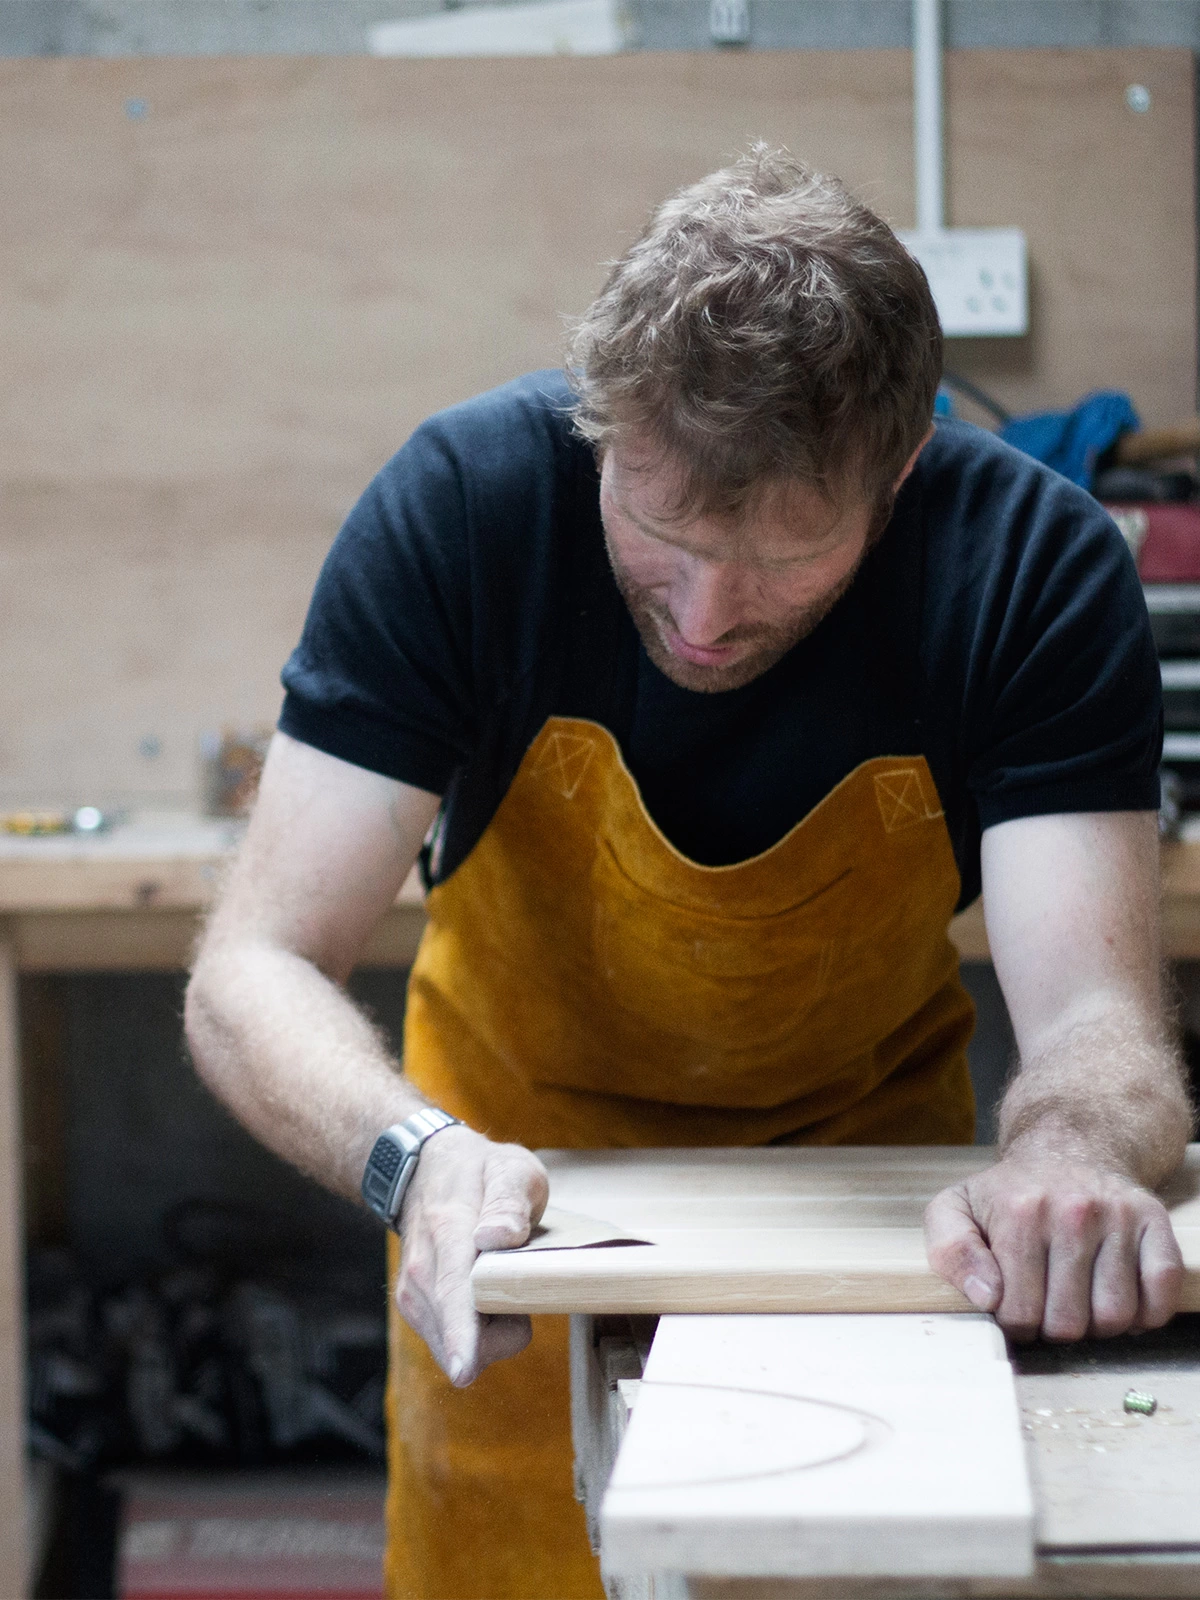 dave jones of coast creative in the workshop finish sanding a tabletop by hand